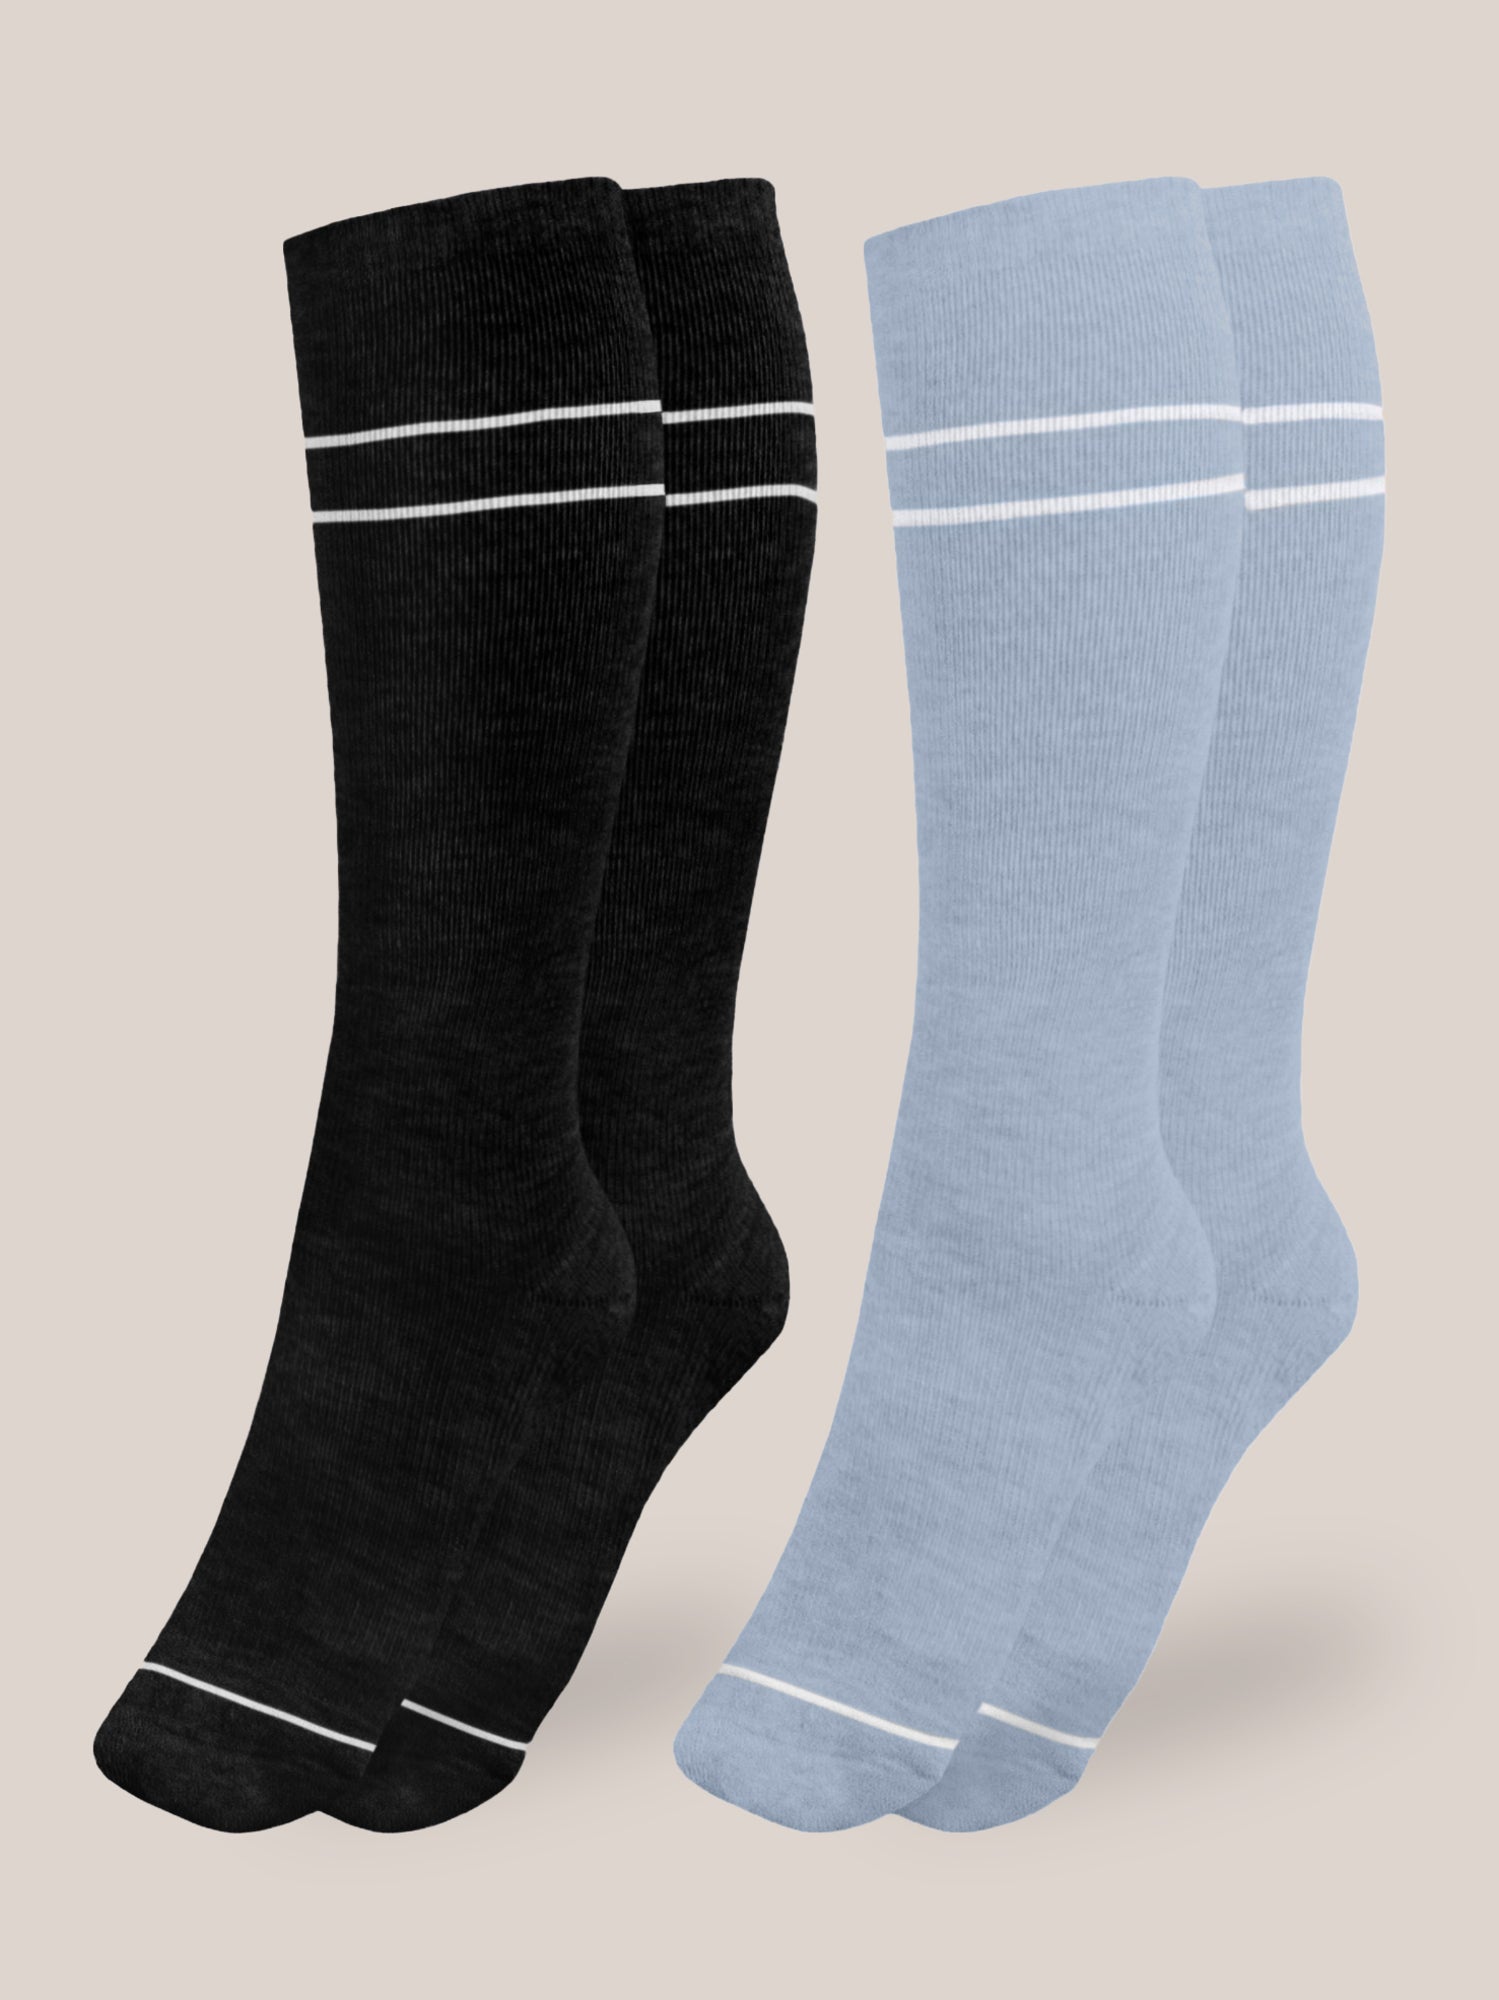 Flat lay of the Premium Maternity Compression Socks in Stone Blue and Black against an off white background.